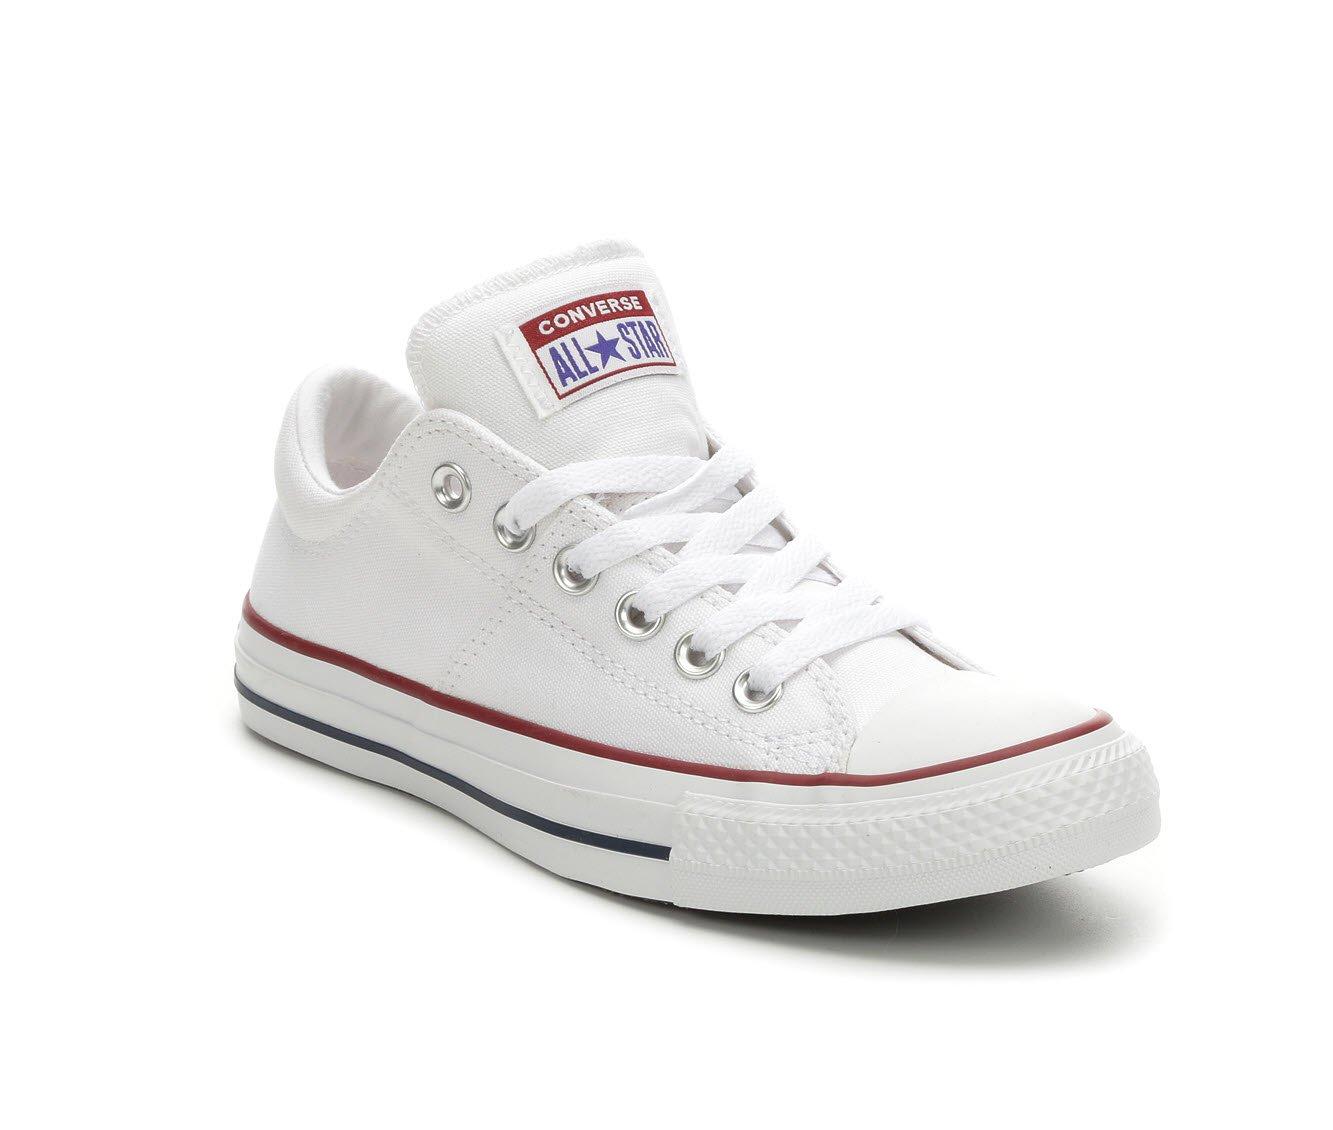 Women's Converse Chuck Taylor All Star Madison Ox Casual Sneakers